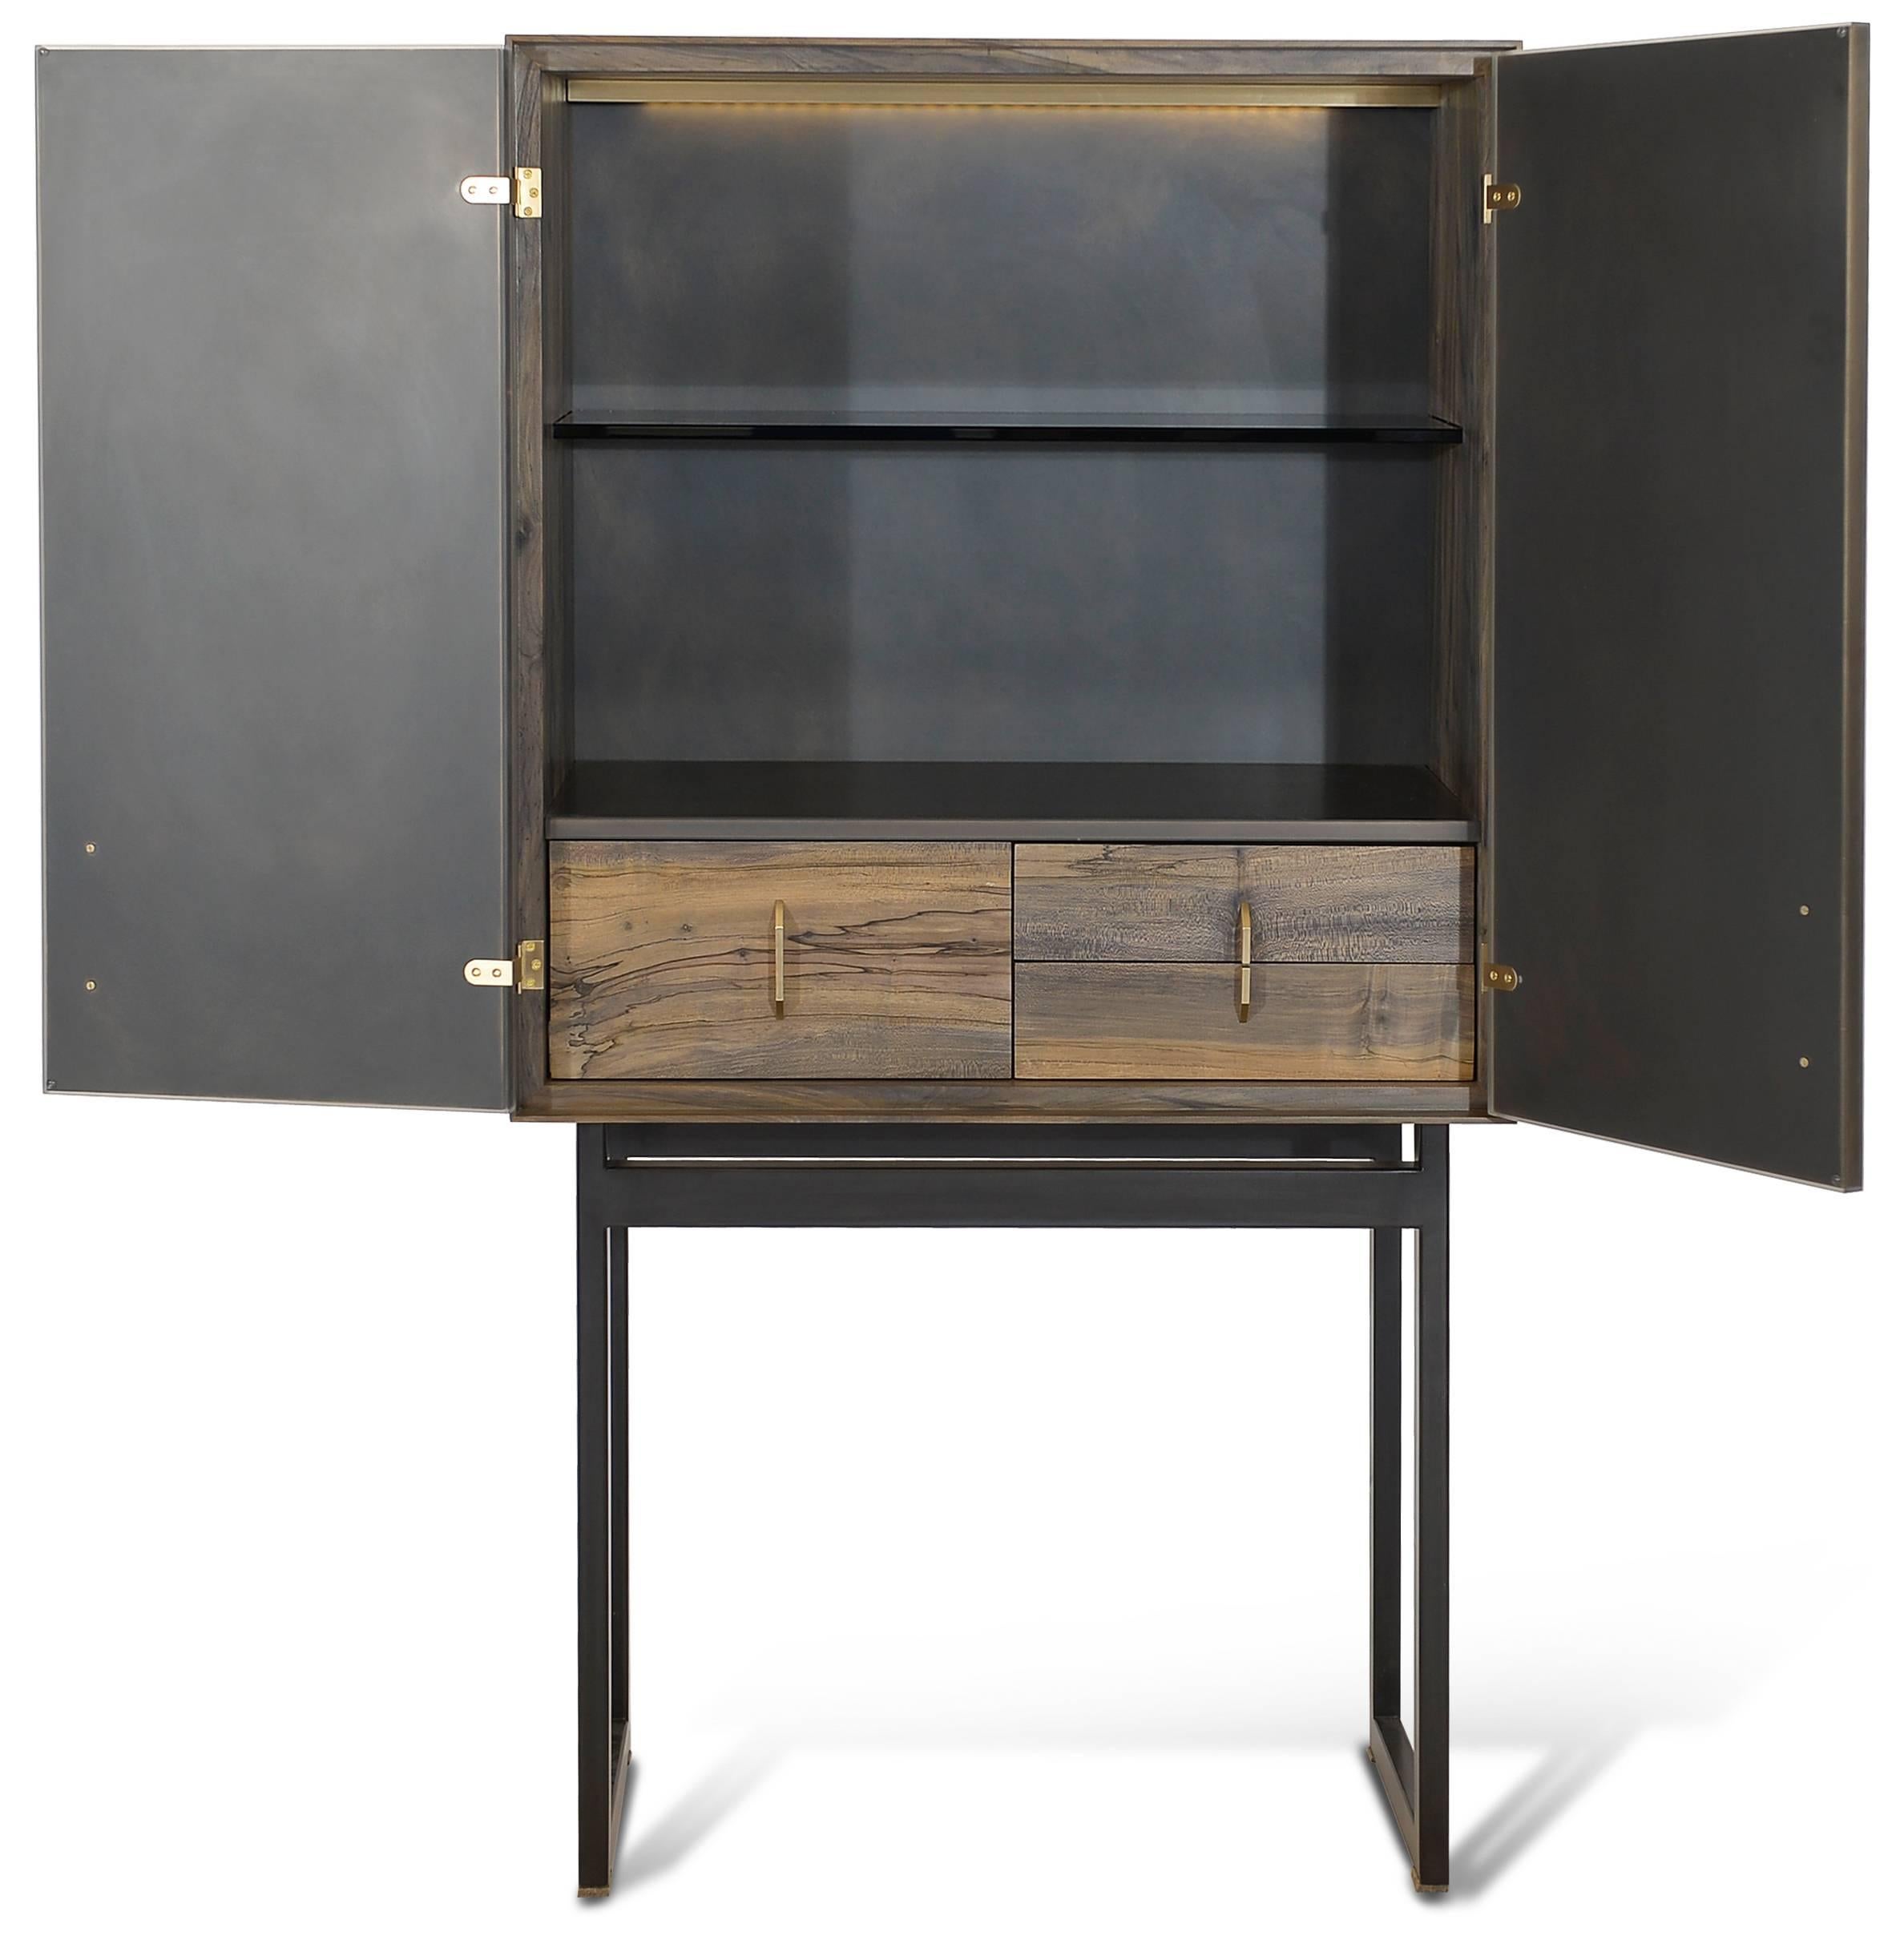 Included in the Gotham collection is this striking bar cabinet. Sitting on top of a modern blackened steel frame is an oxidized ambrosia maple cabinet with blackened bronze encased in resin doors and hand-sculpted bronze pulls. The interior features